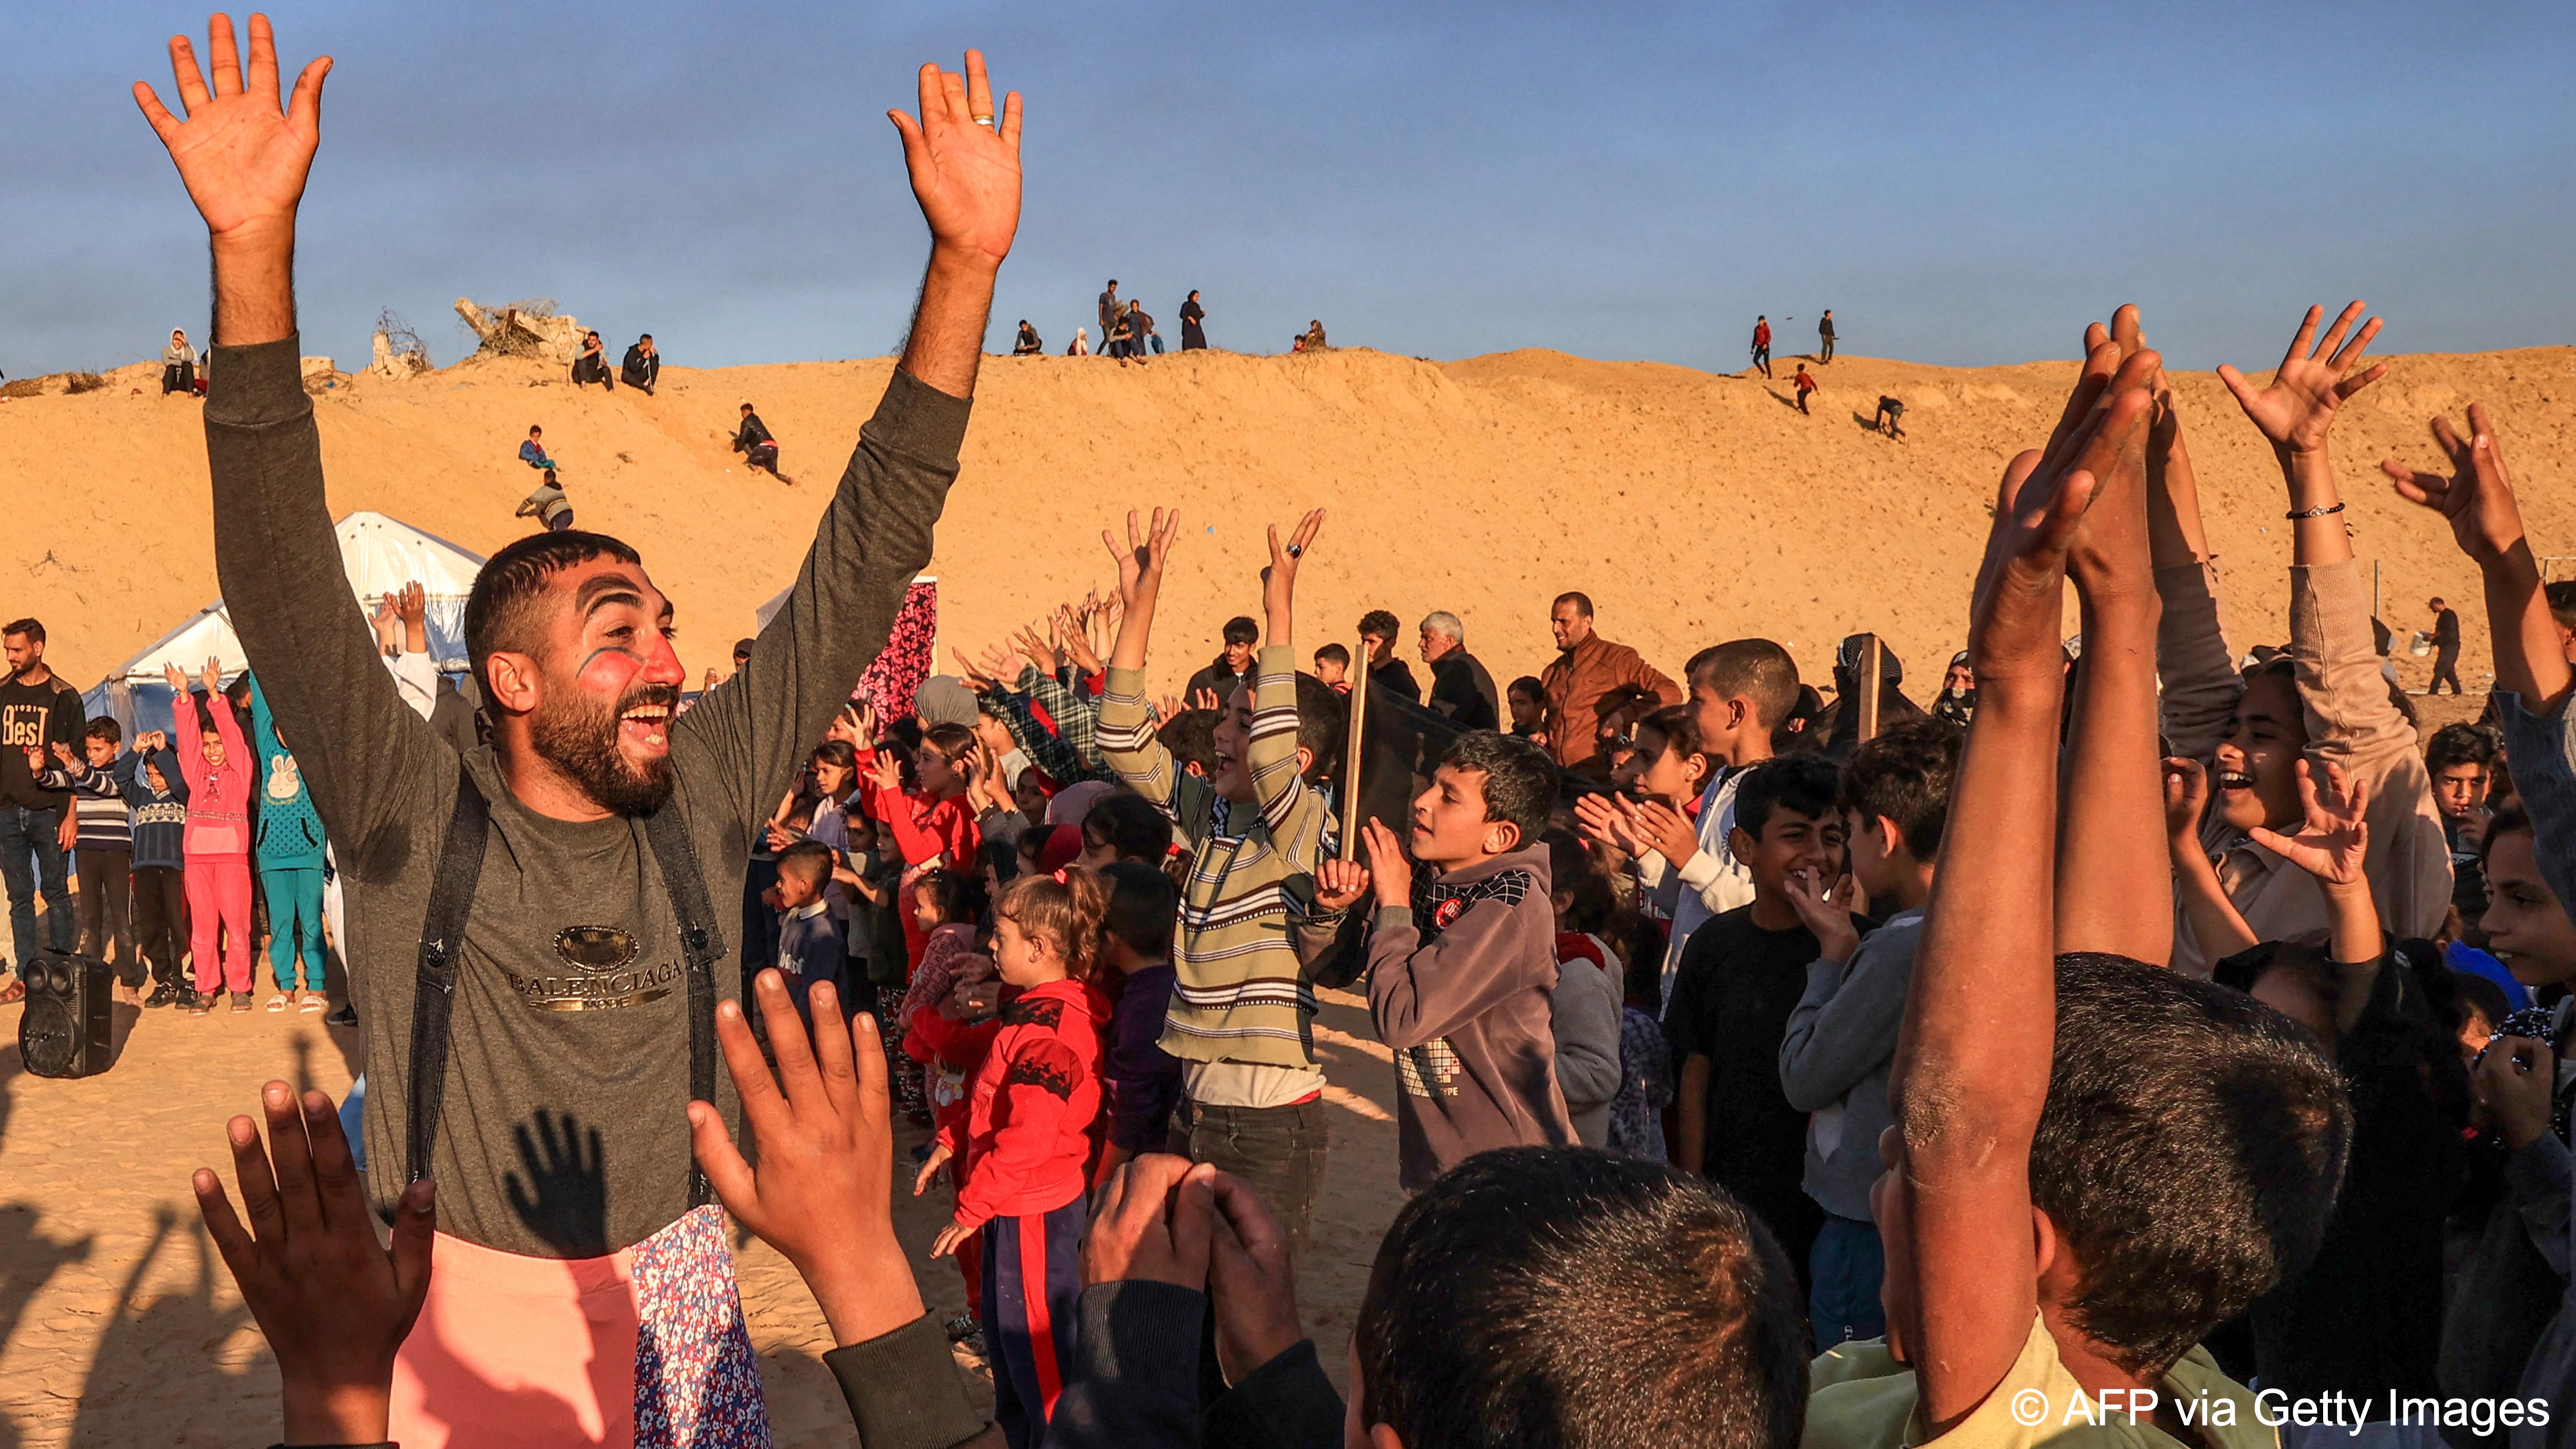 A man wearing clown make-up grins broadly as he raises his arms in the air and entertains a crowd in a camp near Rafah